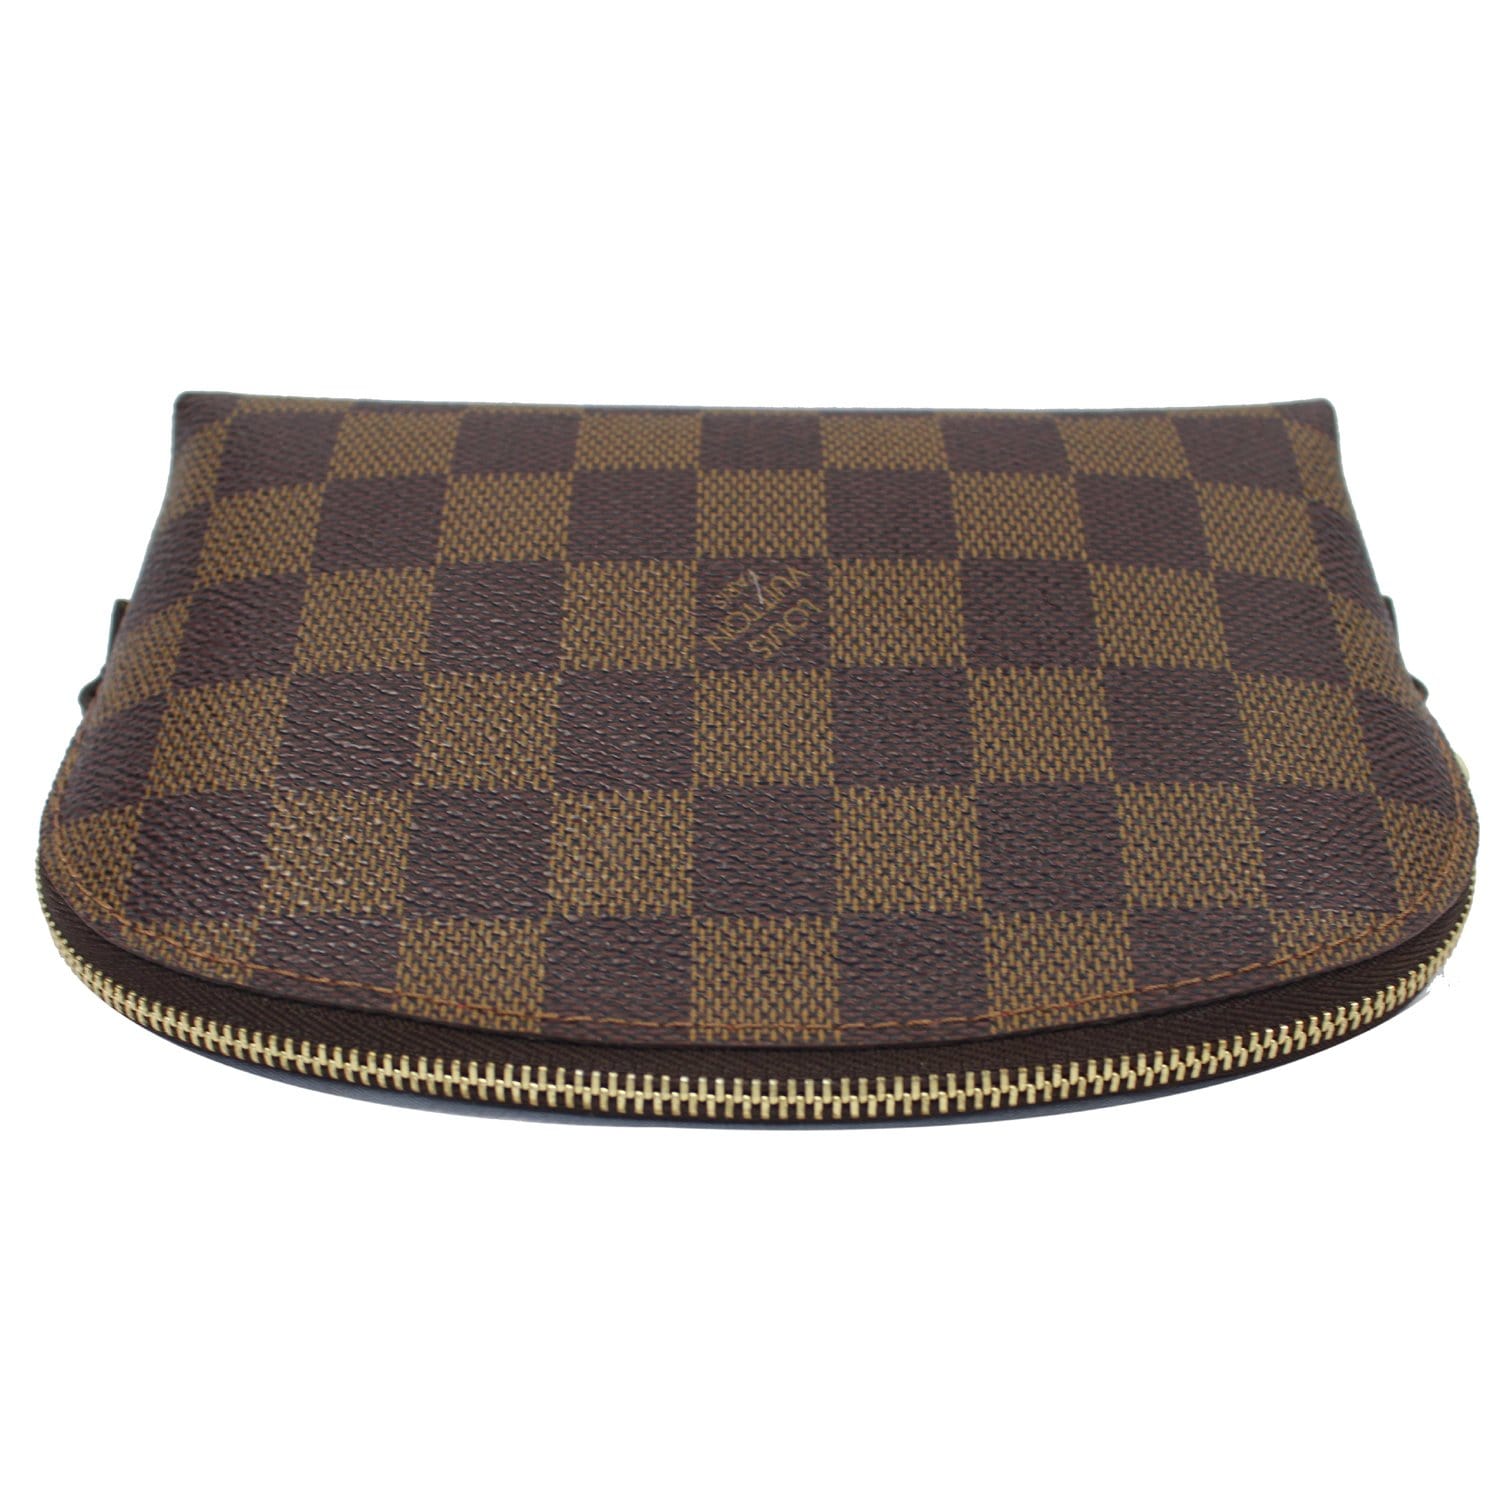 USED Louis Vuitton Damier Ebene Cosmetic Pouch AUTHENTIC